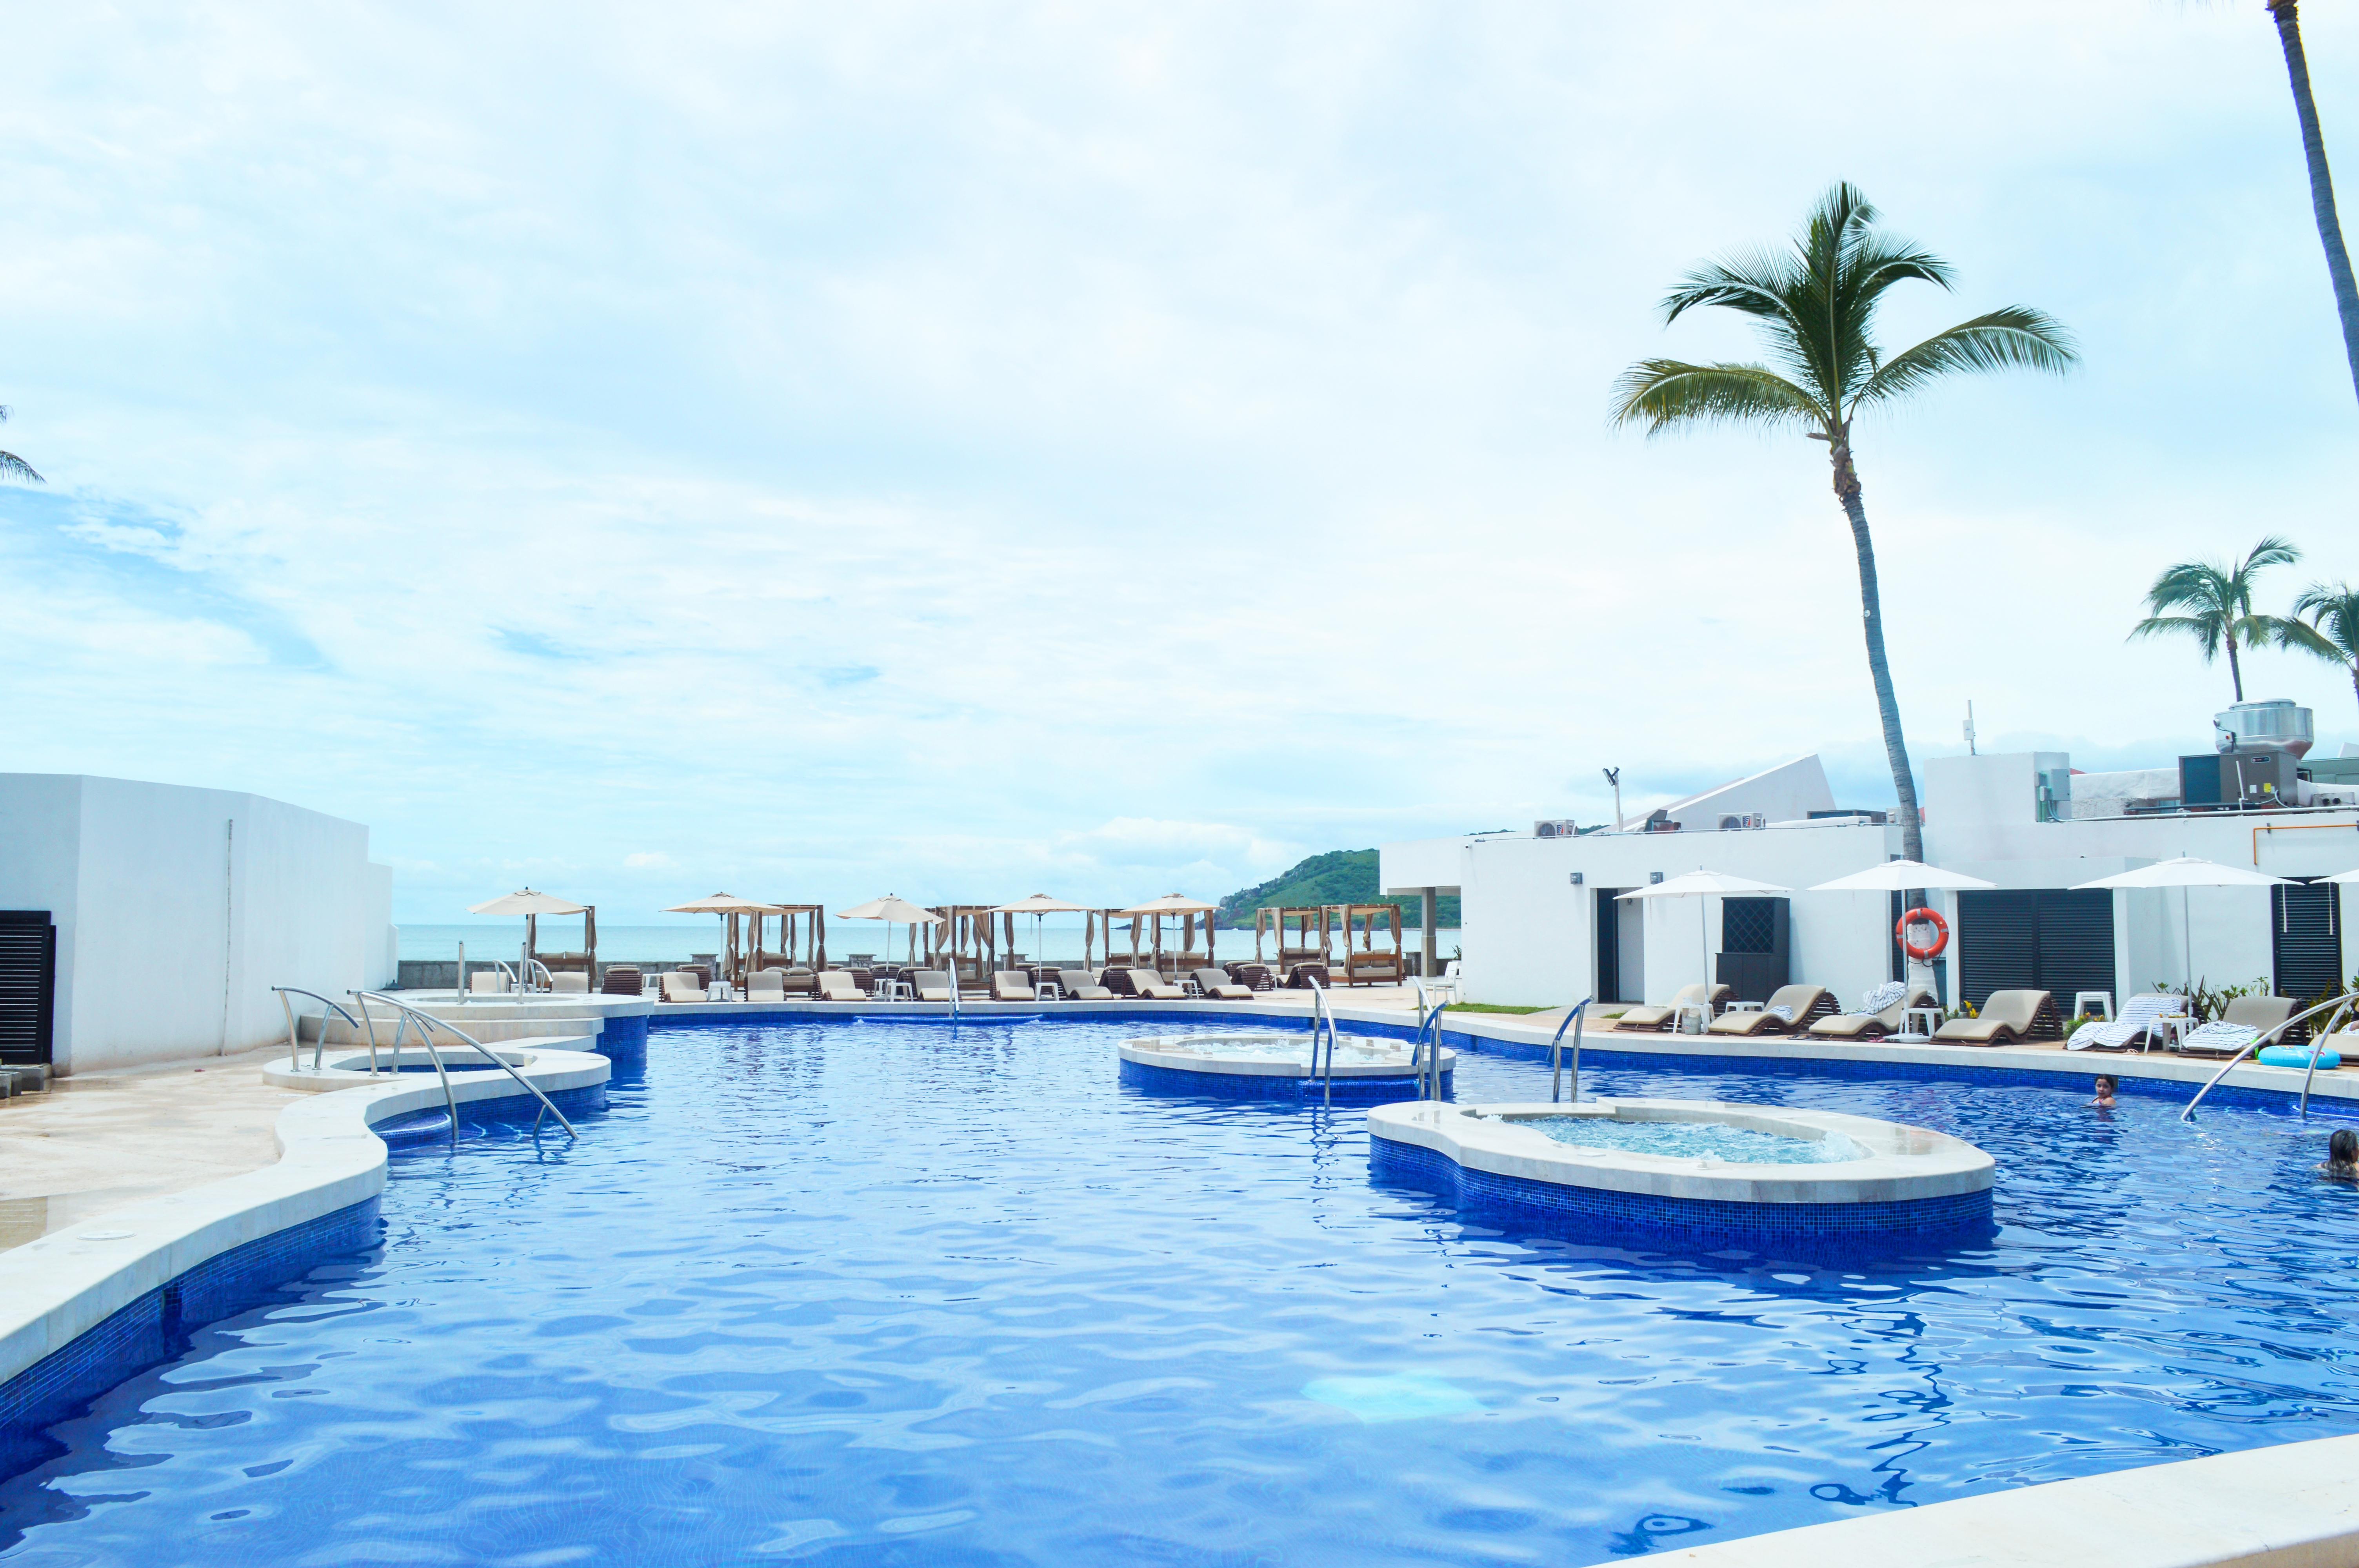 HOTEL THE INN AT MAZATLAN 5* (Mexico) - from C$ 213 | iBOOKED